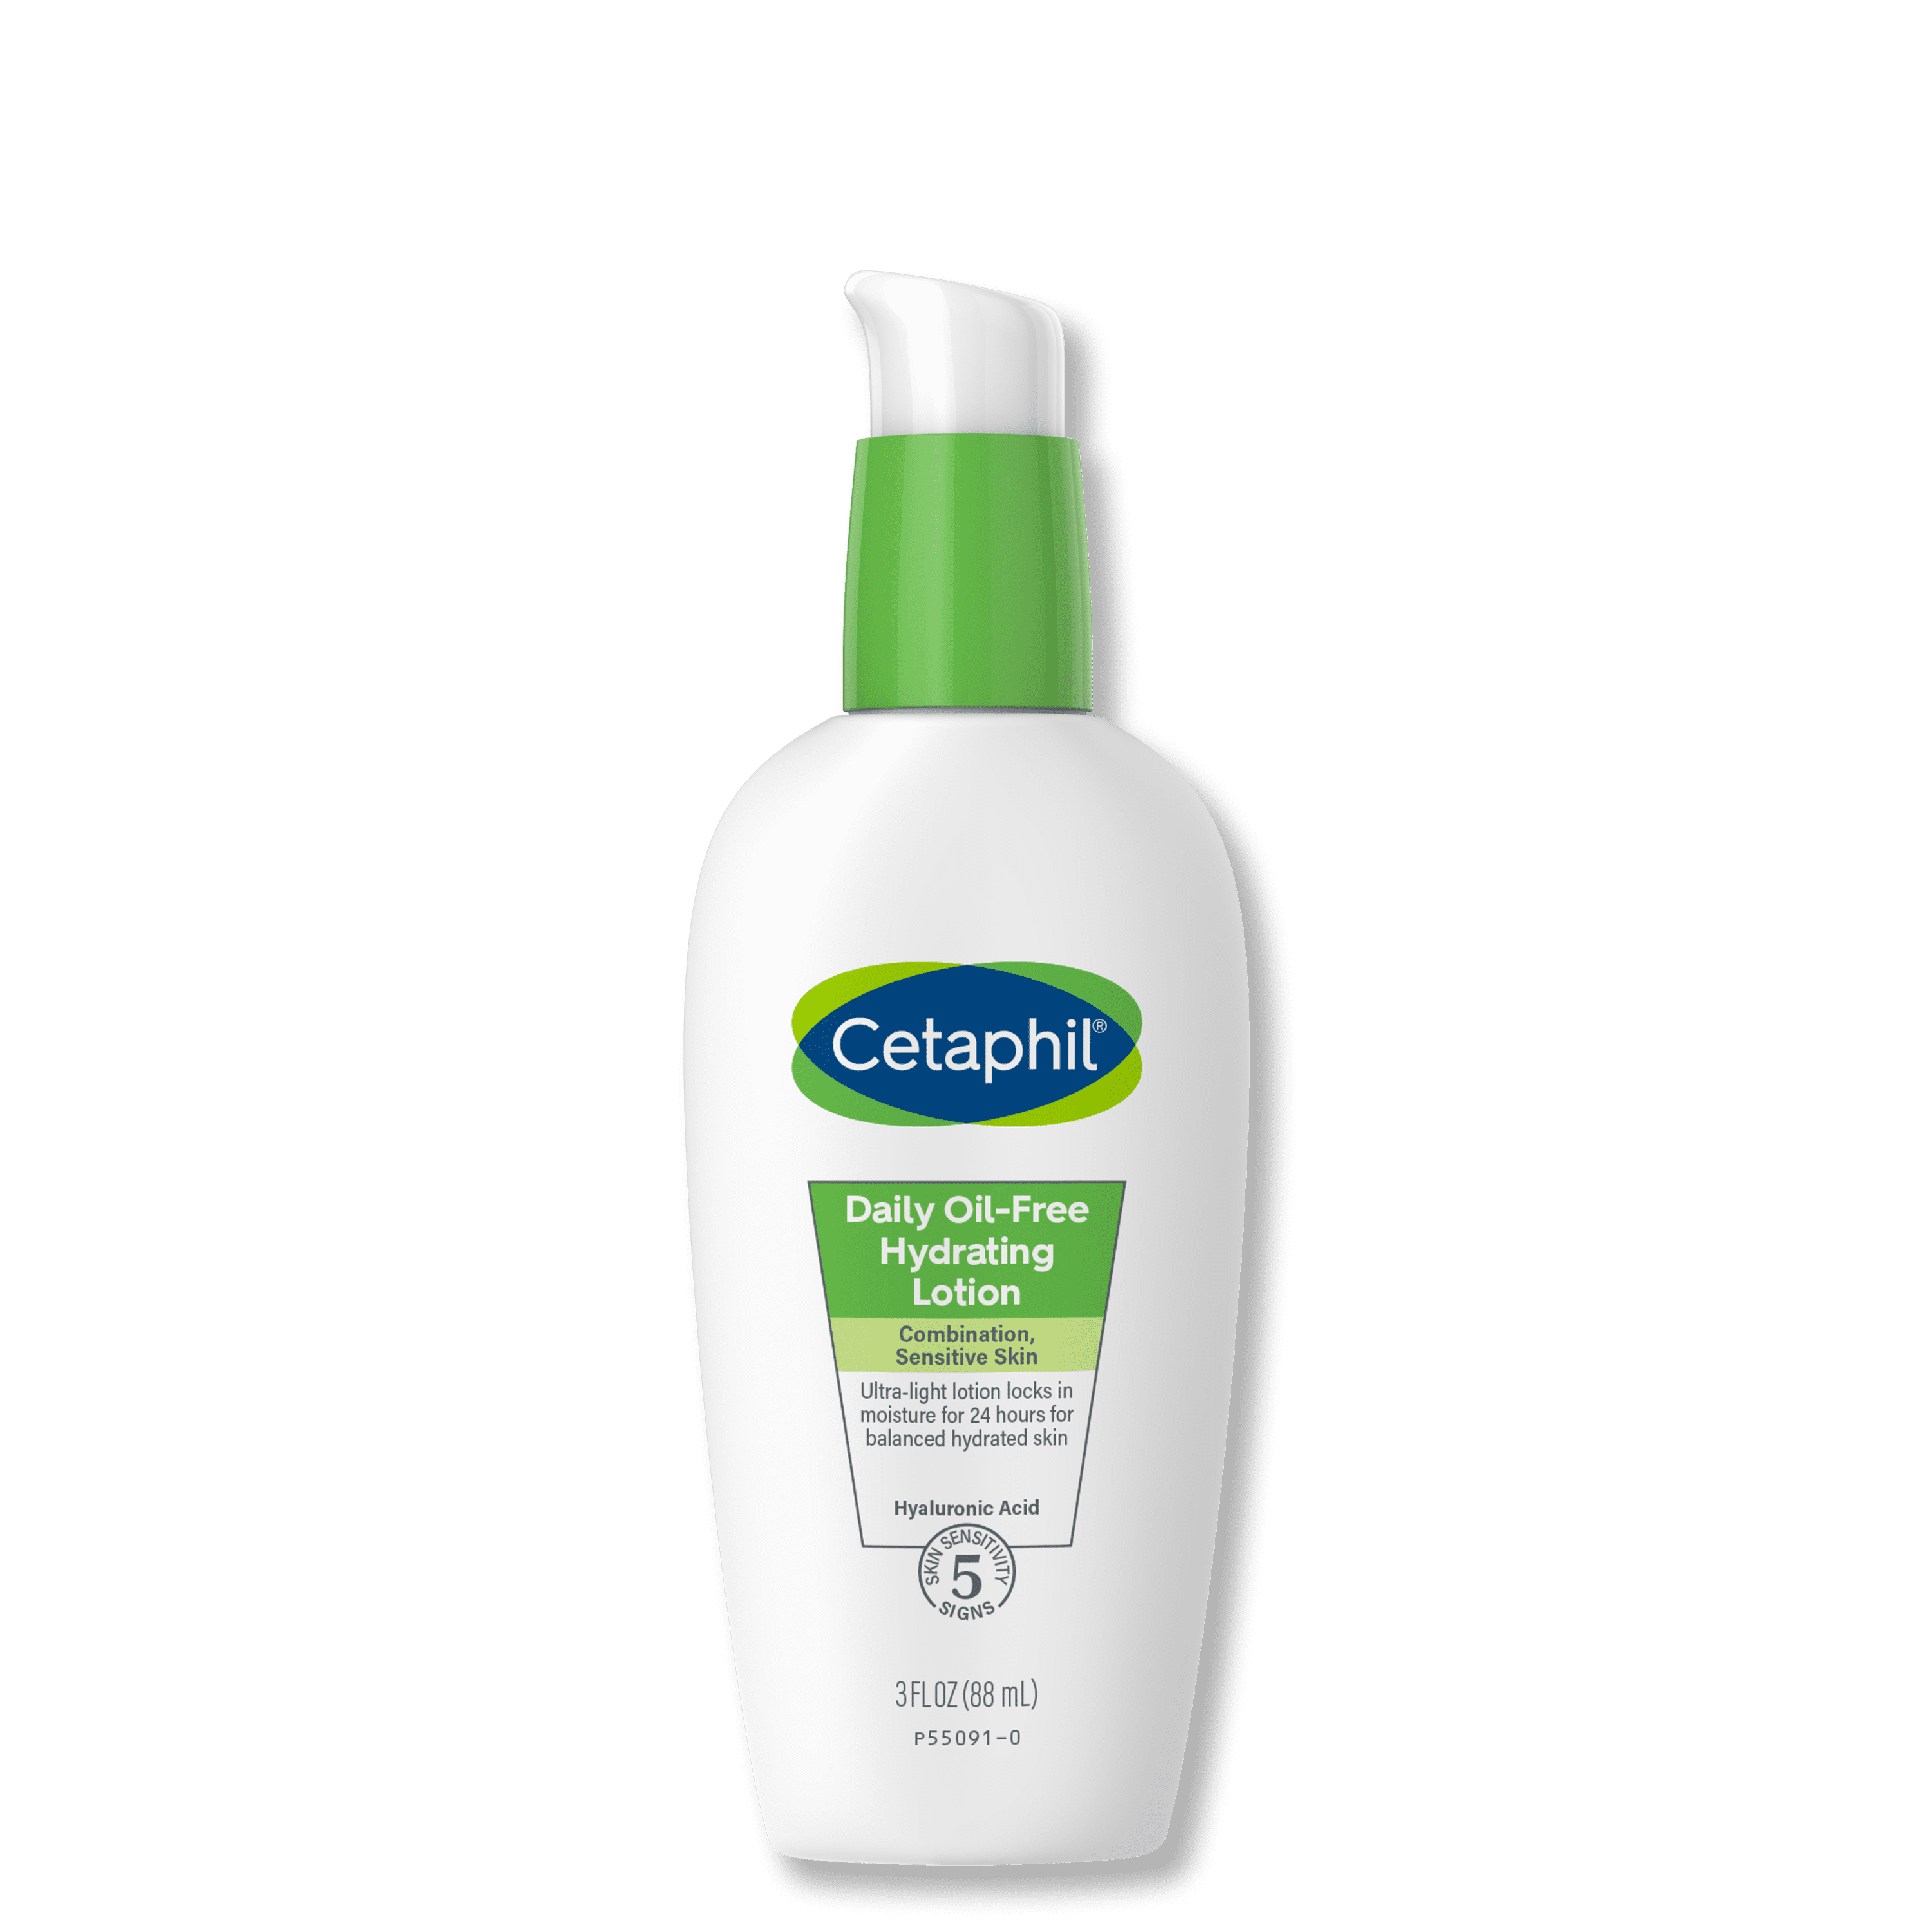 CETAPHIL Daily Oil Free Hydrating Lotion for Face | With Hyaluronic Acid | 3 fl oz | Lasting 24 Hour Hydration | Daily Lotion for Combination Skin | Fragrance Free | Non-Comedogenic